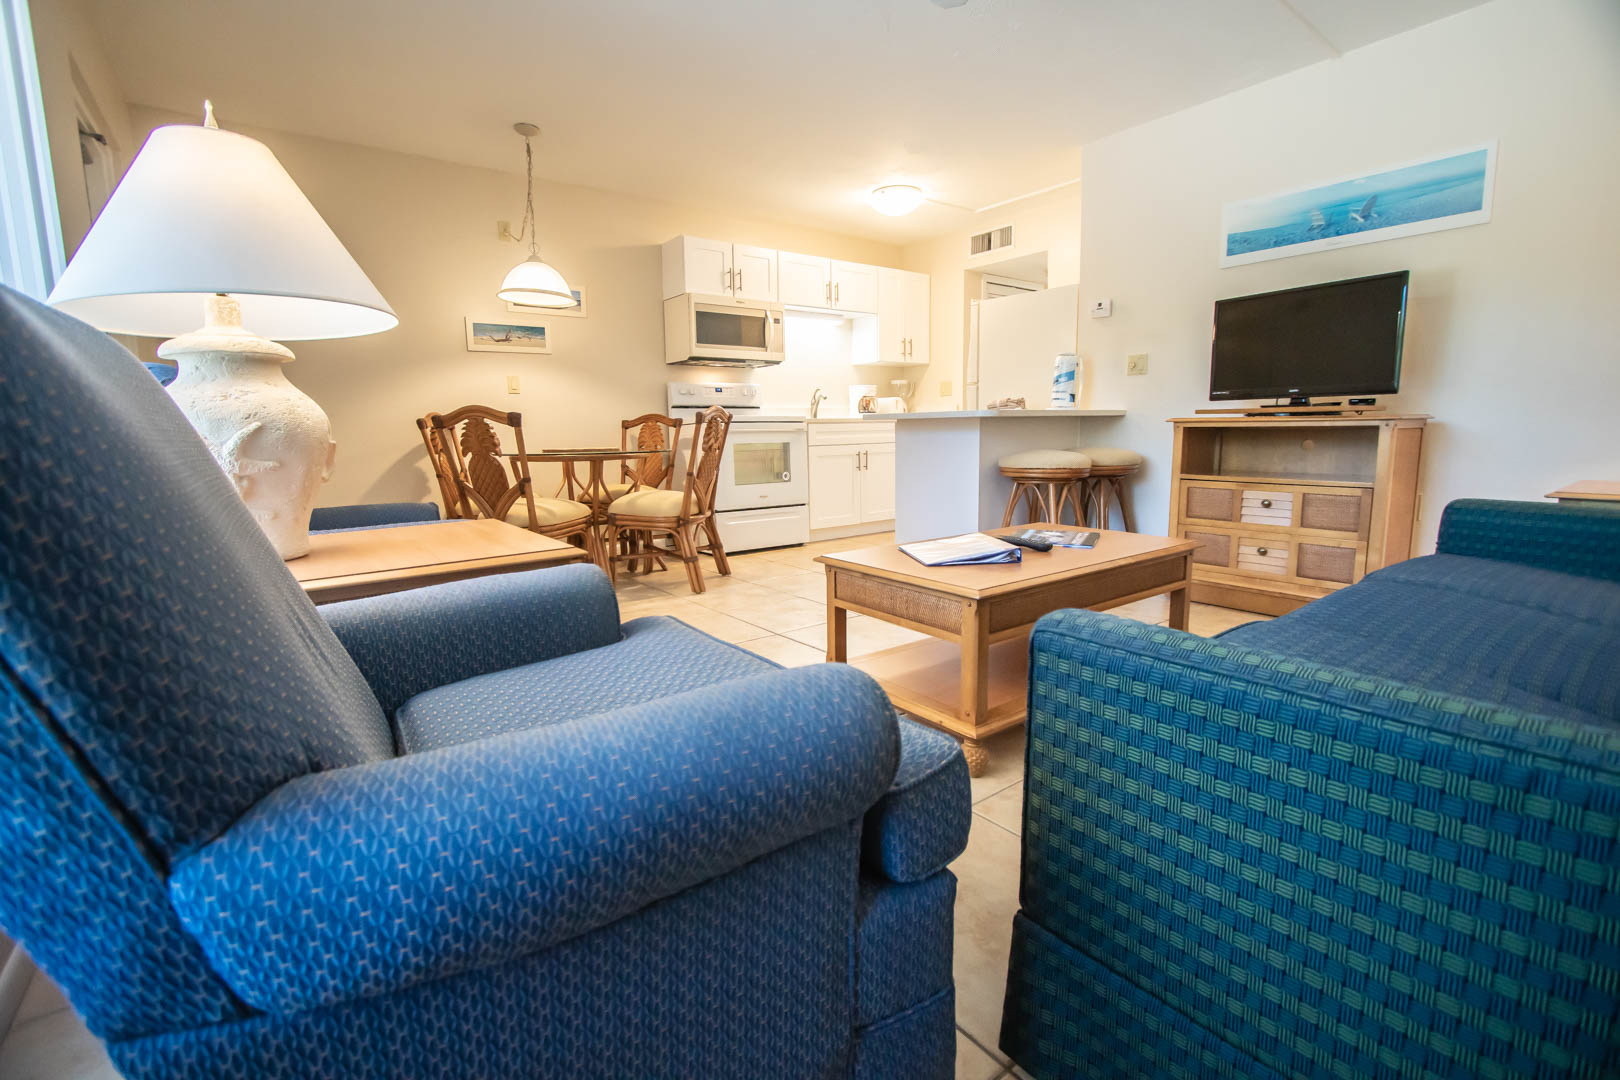 A spacious living room and kitchen view at VRI's Windward Passage Resort in Fort Myers Beach, Florida.